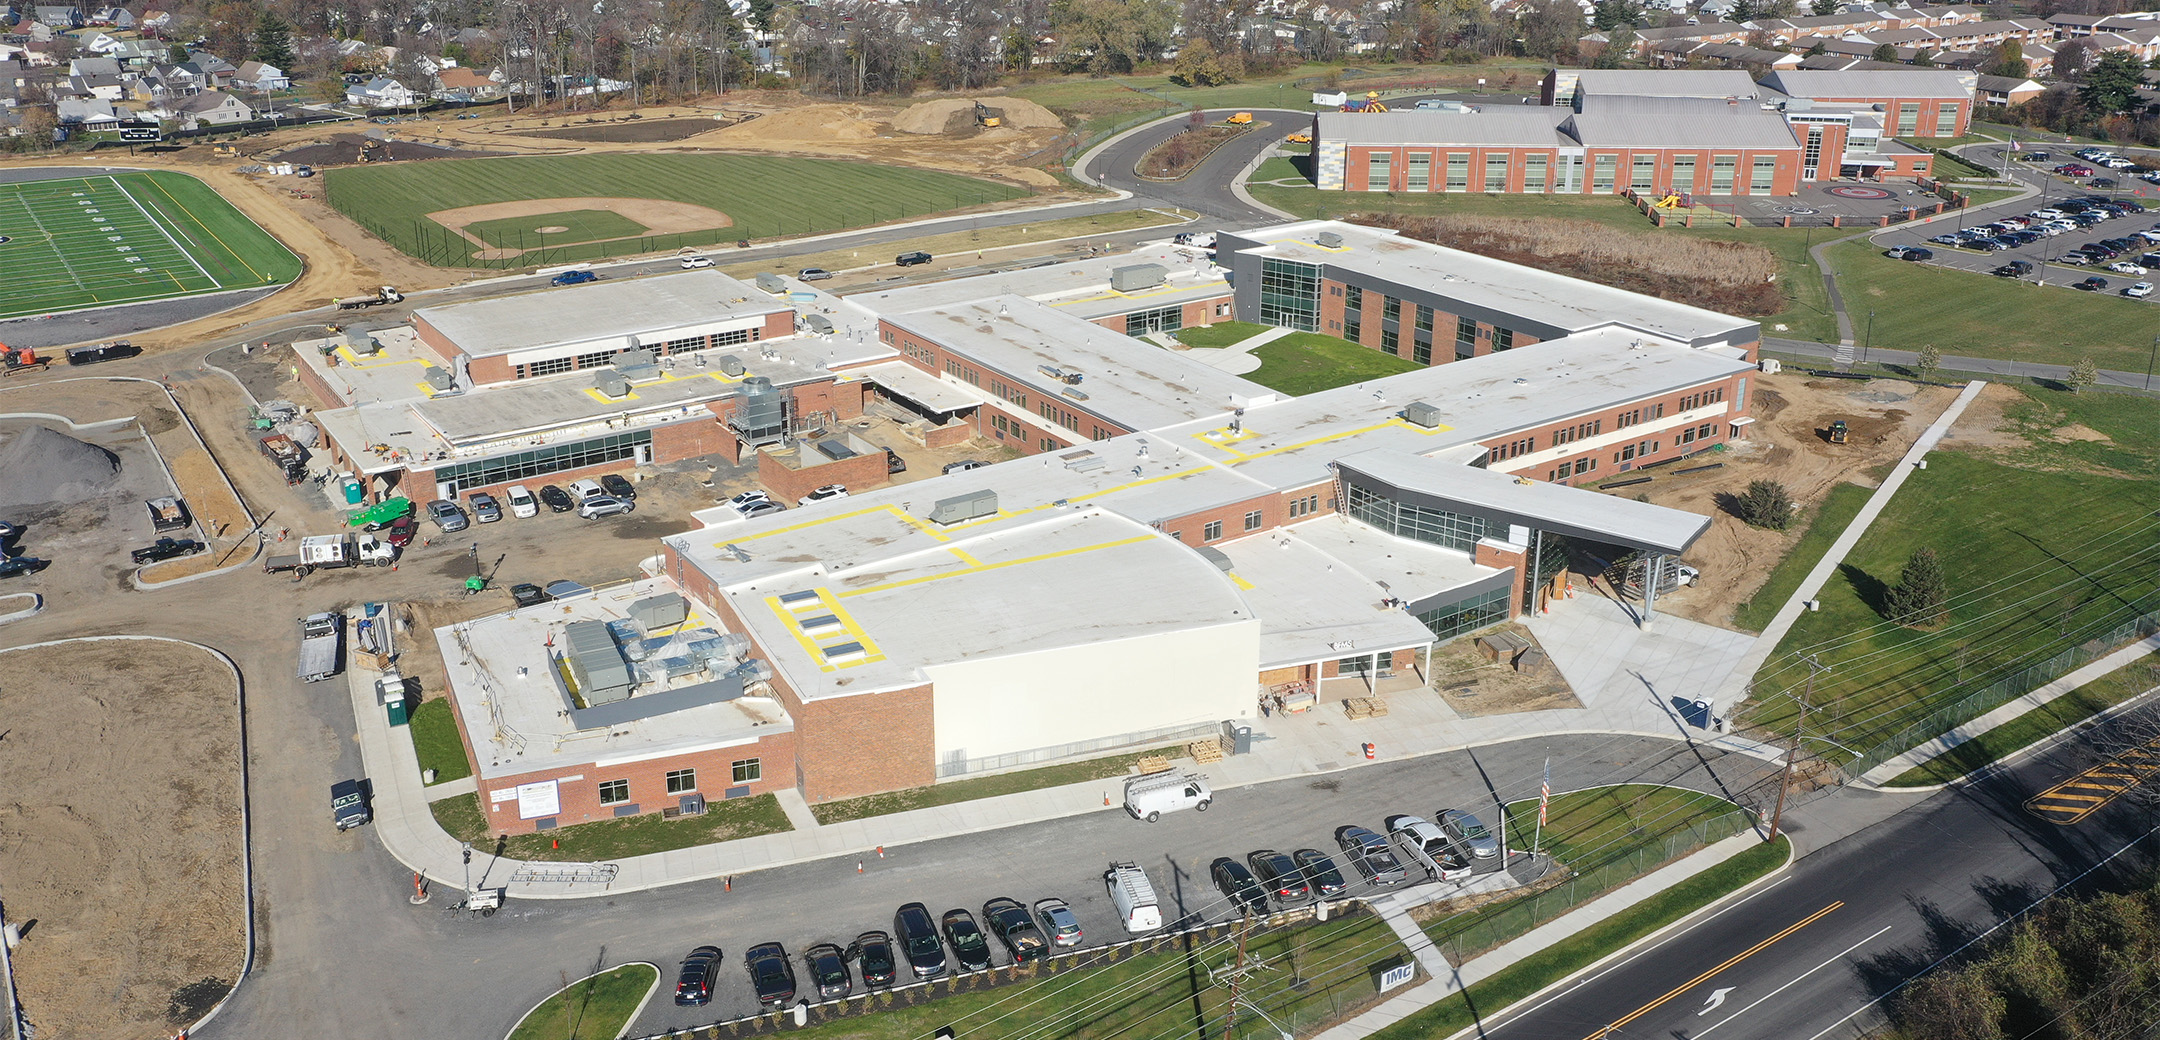 An aerial view of the active construction site of the Ben Franklin Middle School